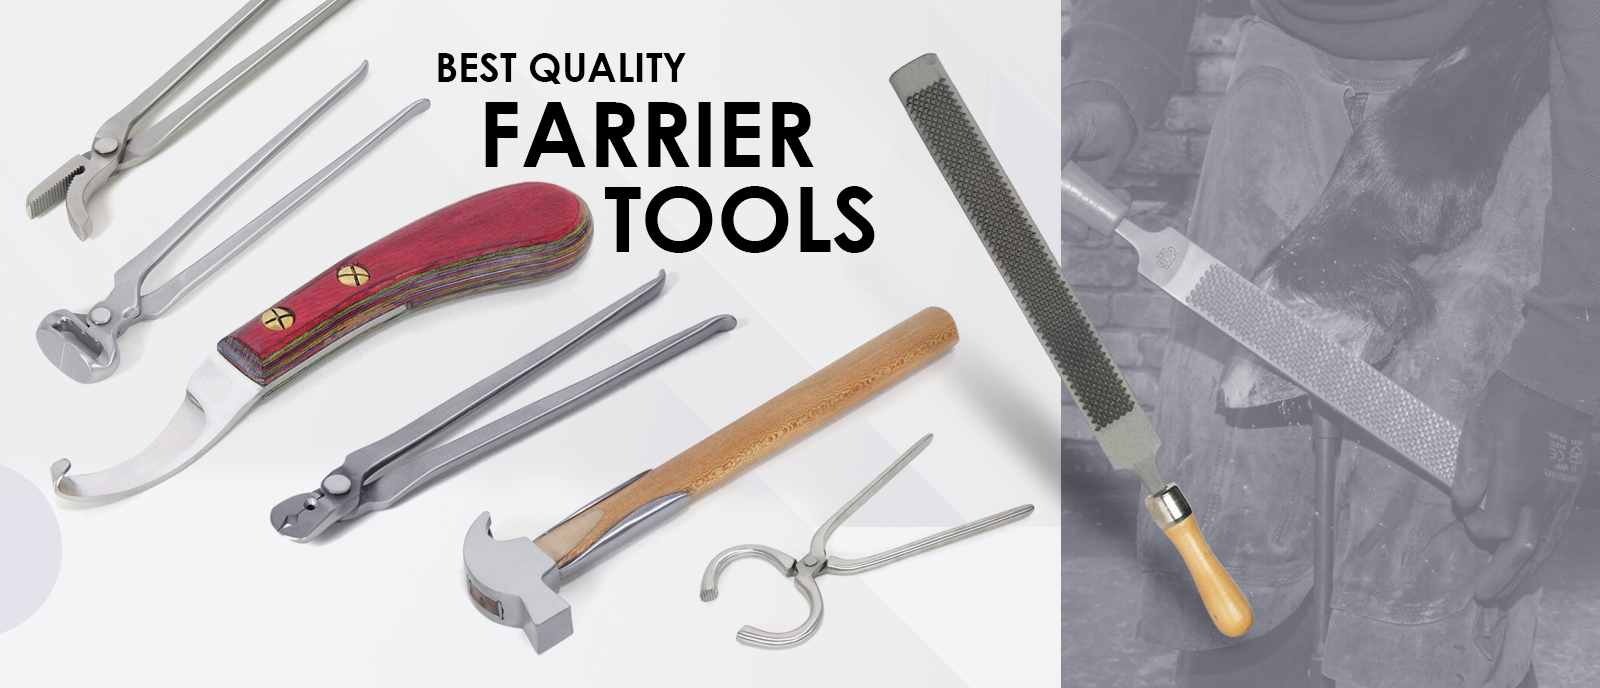 Farrier Tools